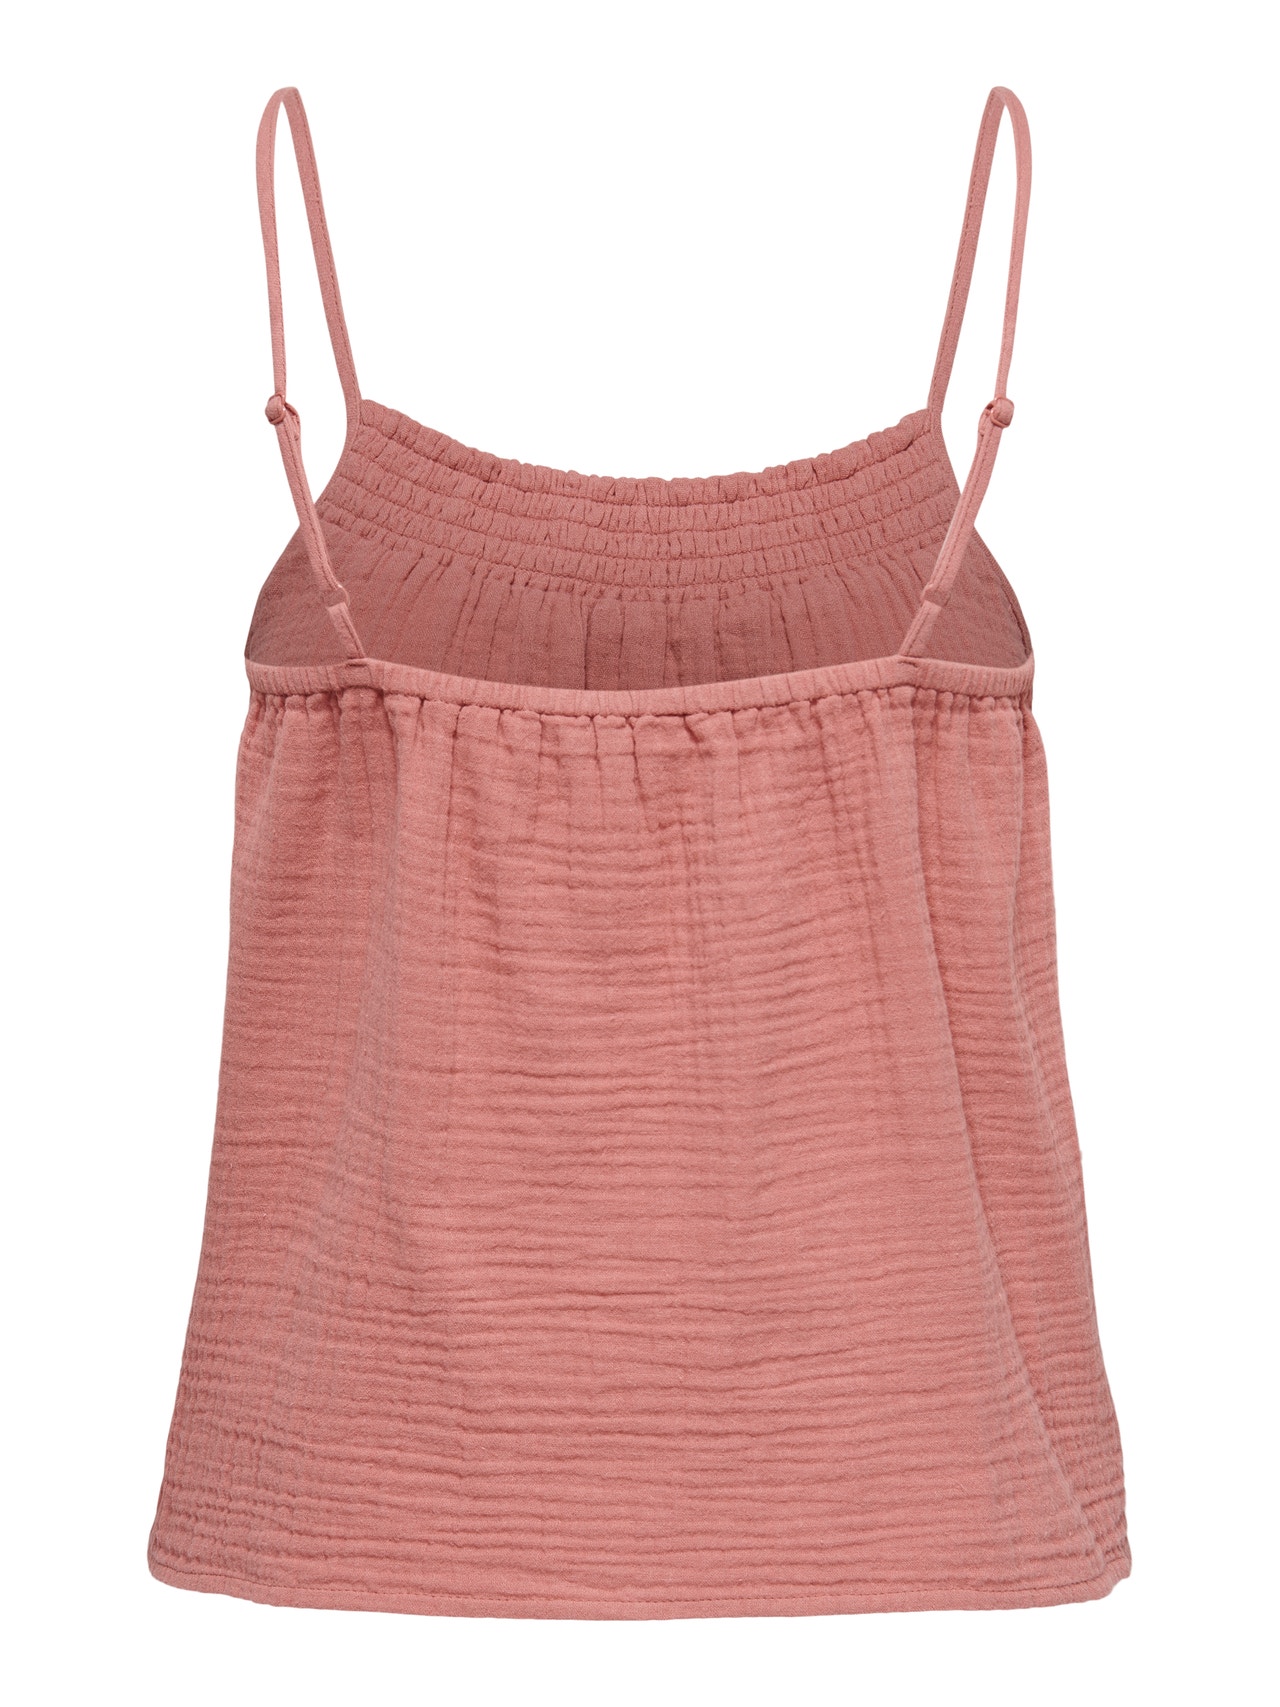 ONLY Smock strap top -Canyon Rose - 15269963